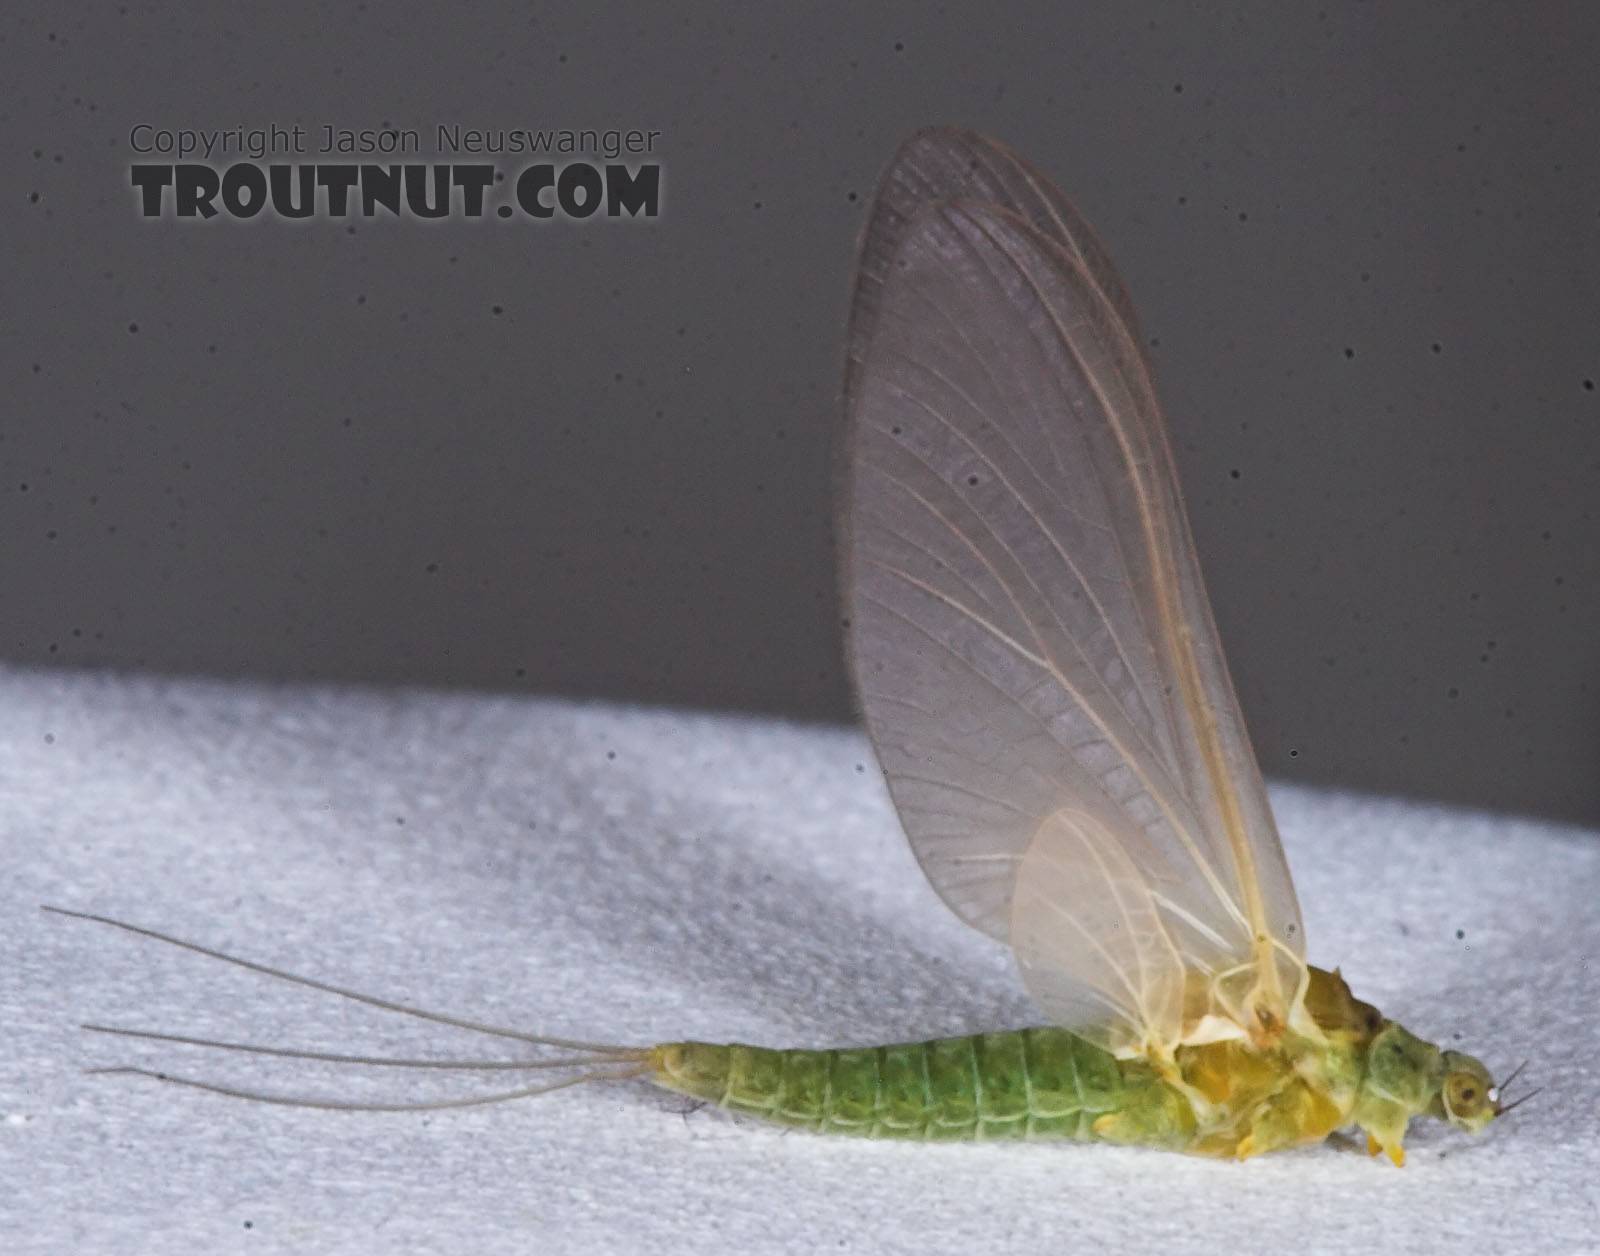 Female Attenella attenuata (Small Eastern Blue-Winged Olive) Mayfly Dun from the Namekagon River in Wisconsin